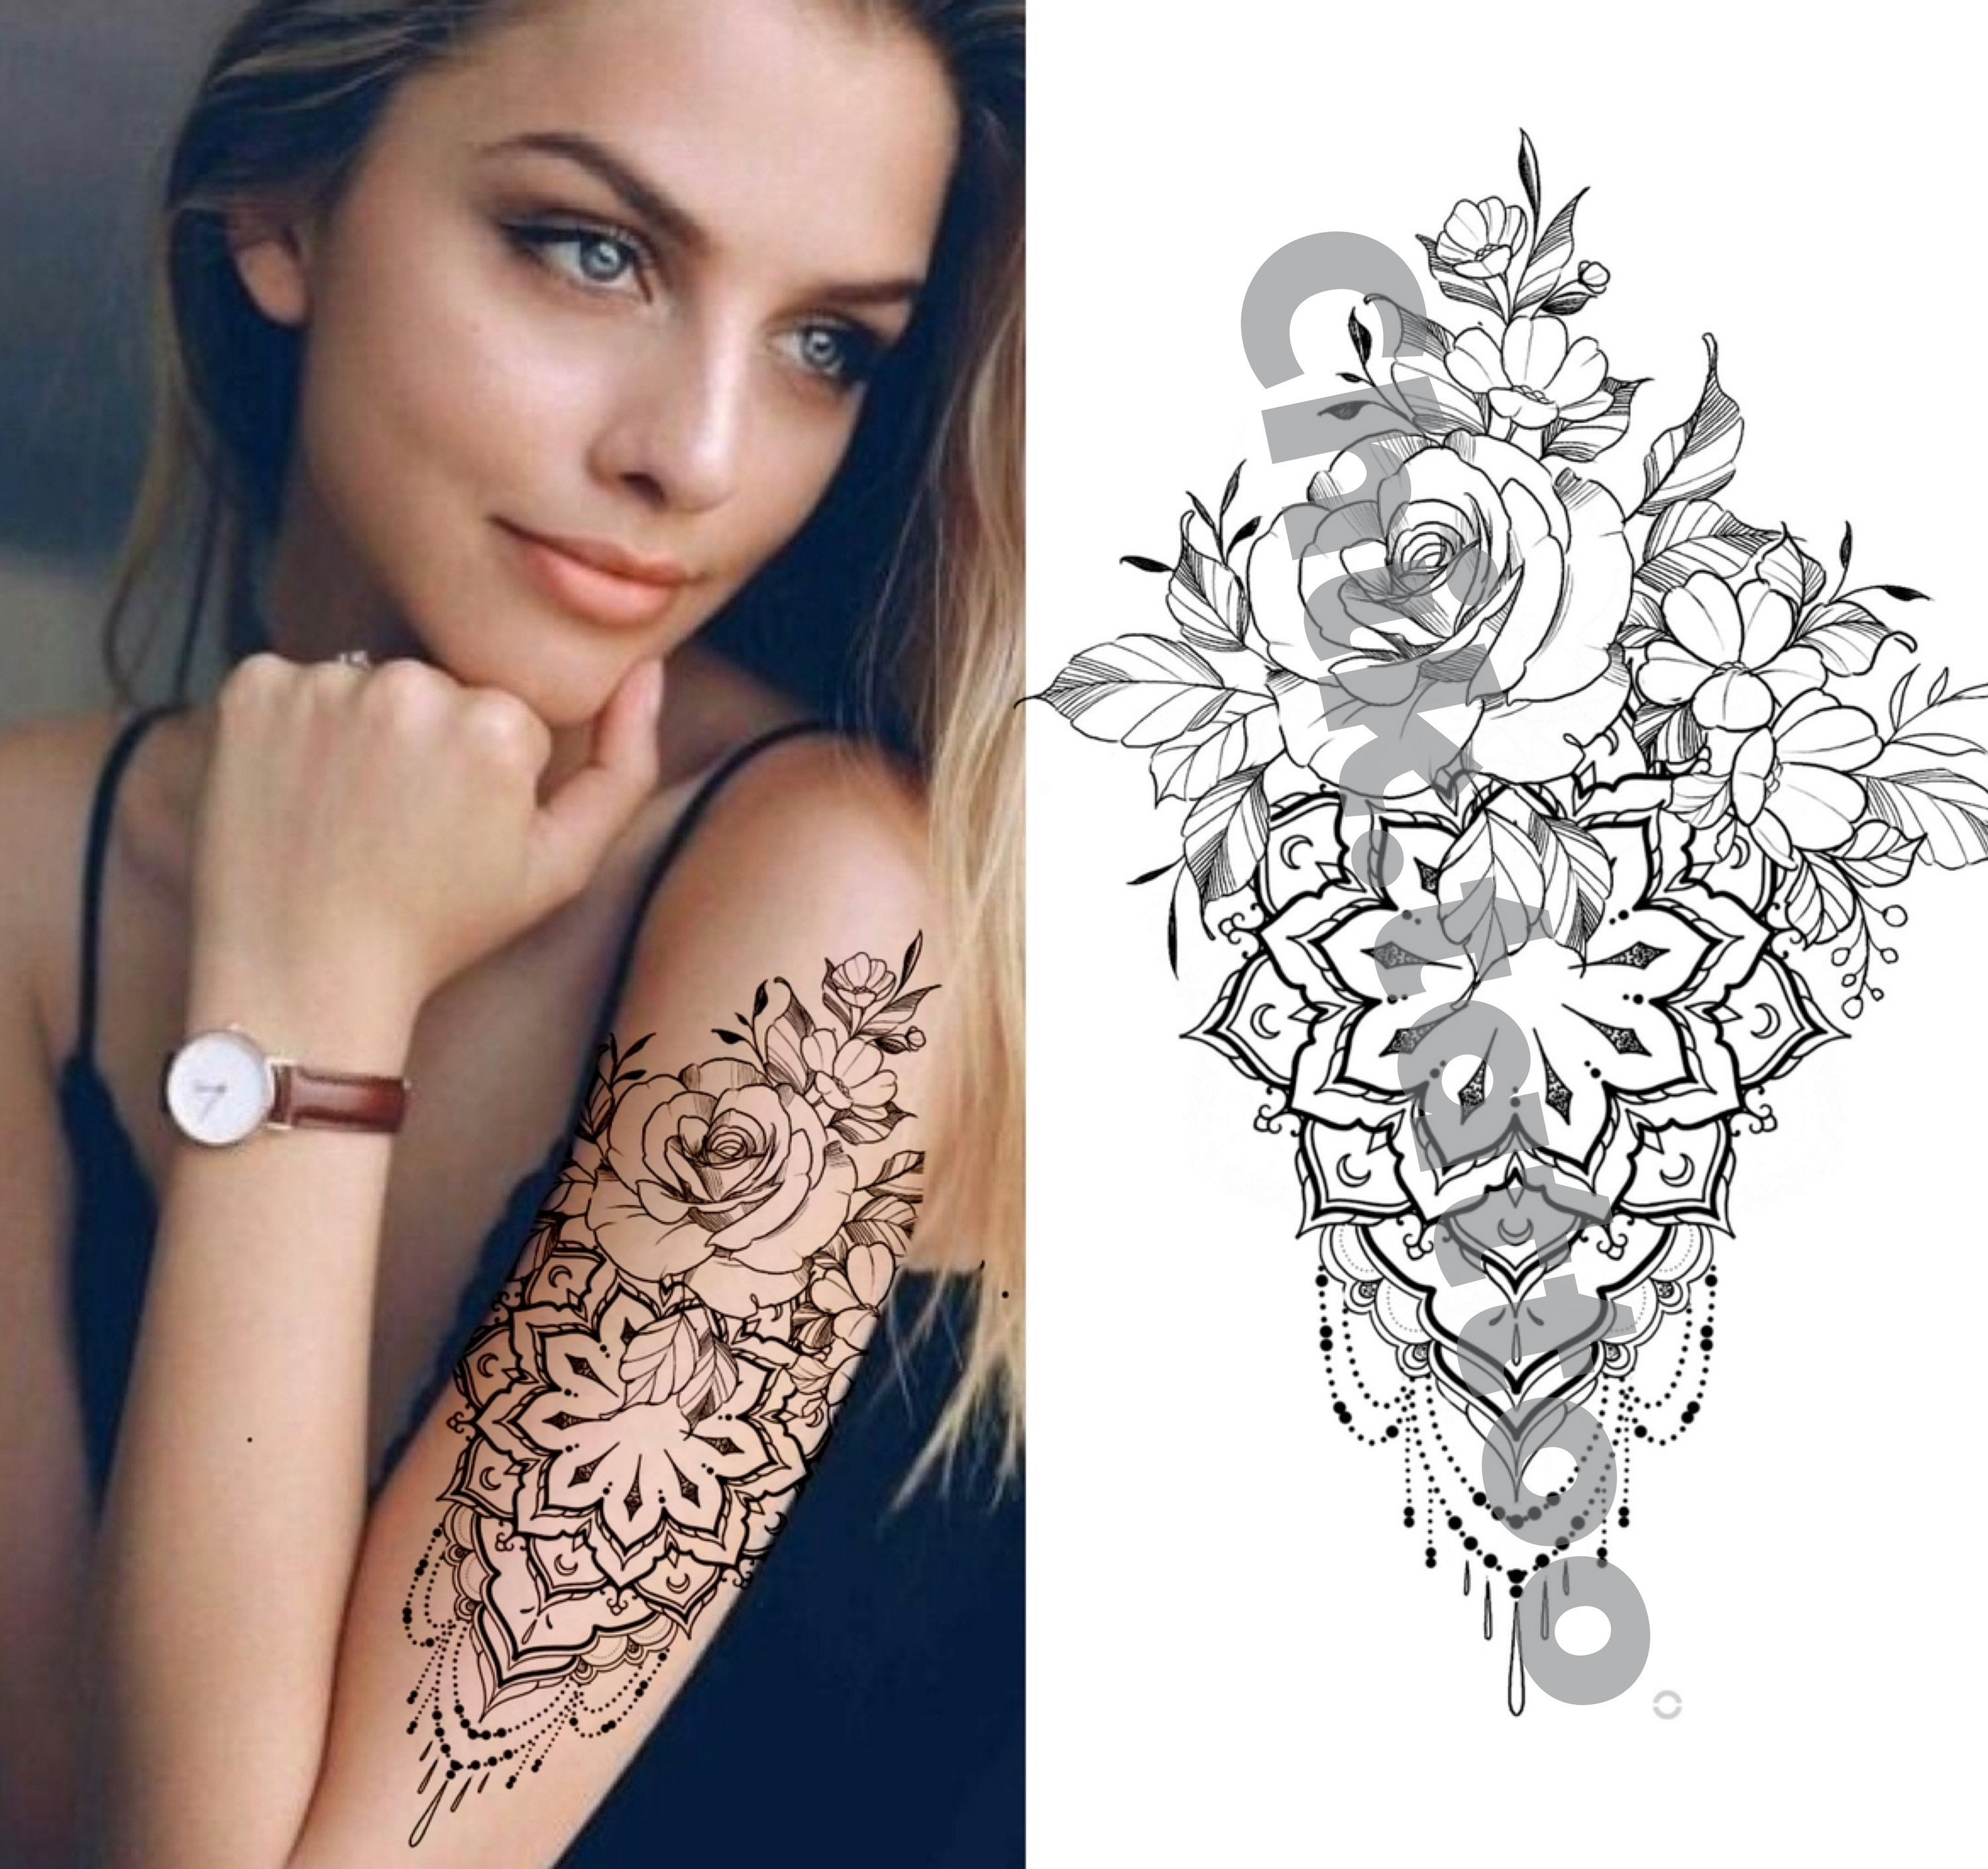 Amazon.com : Supperb Temporary Tattoos - Mandala Floral Lotus Feather  Flower Jewelry Bohemian Tattoo (Set of 2) : Beauty & Personal Care